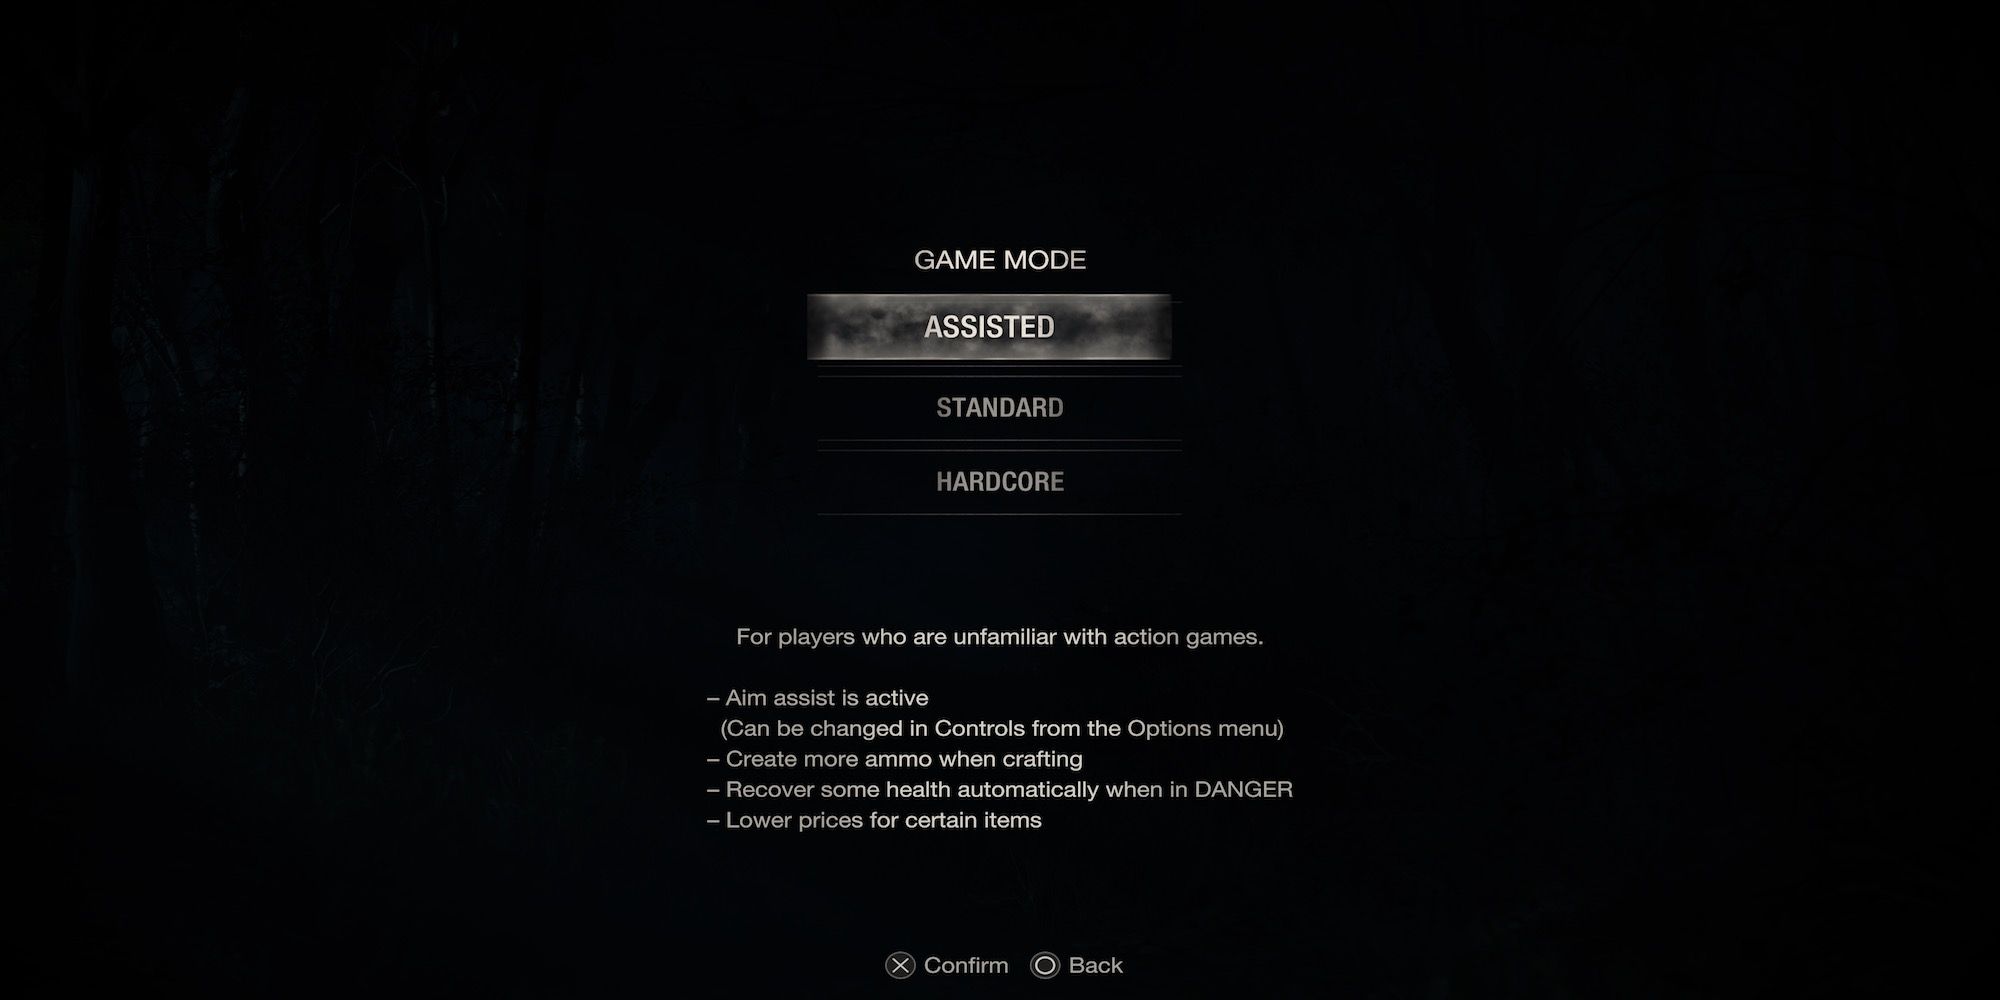 The difficulty menu in the Resident Evil 4 Remake